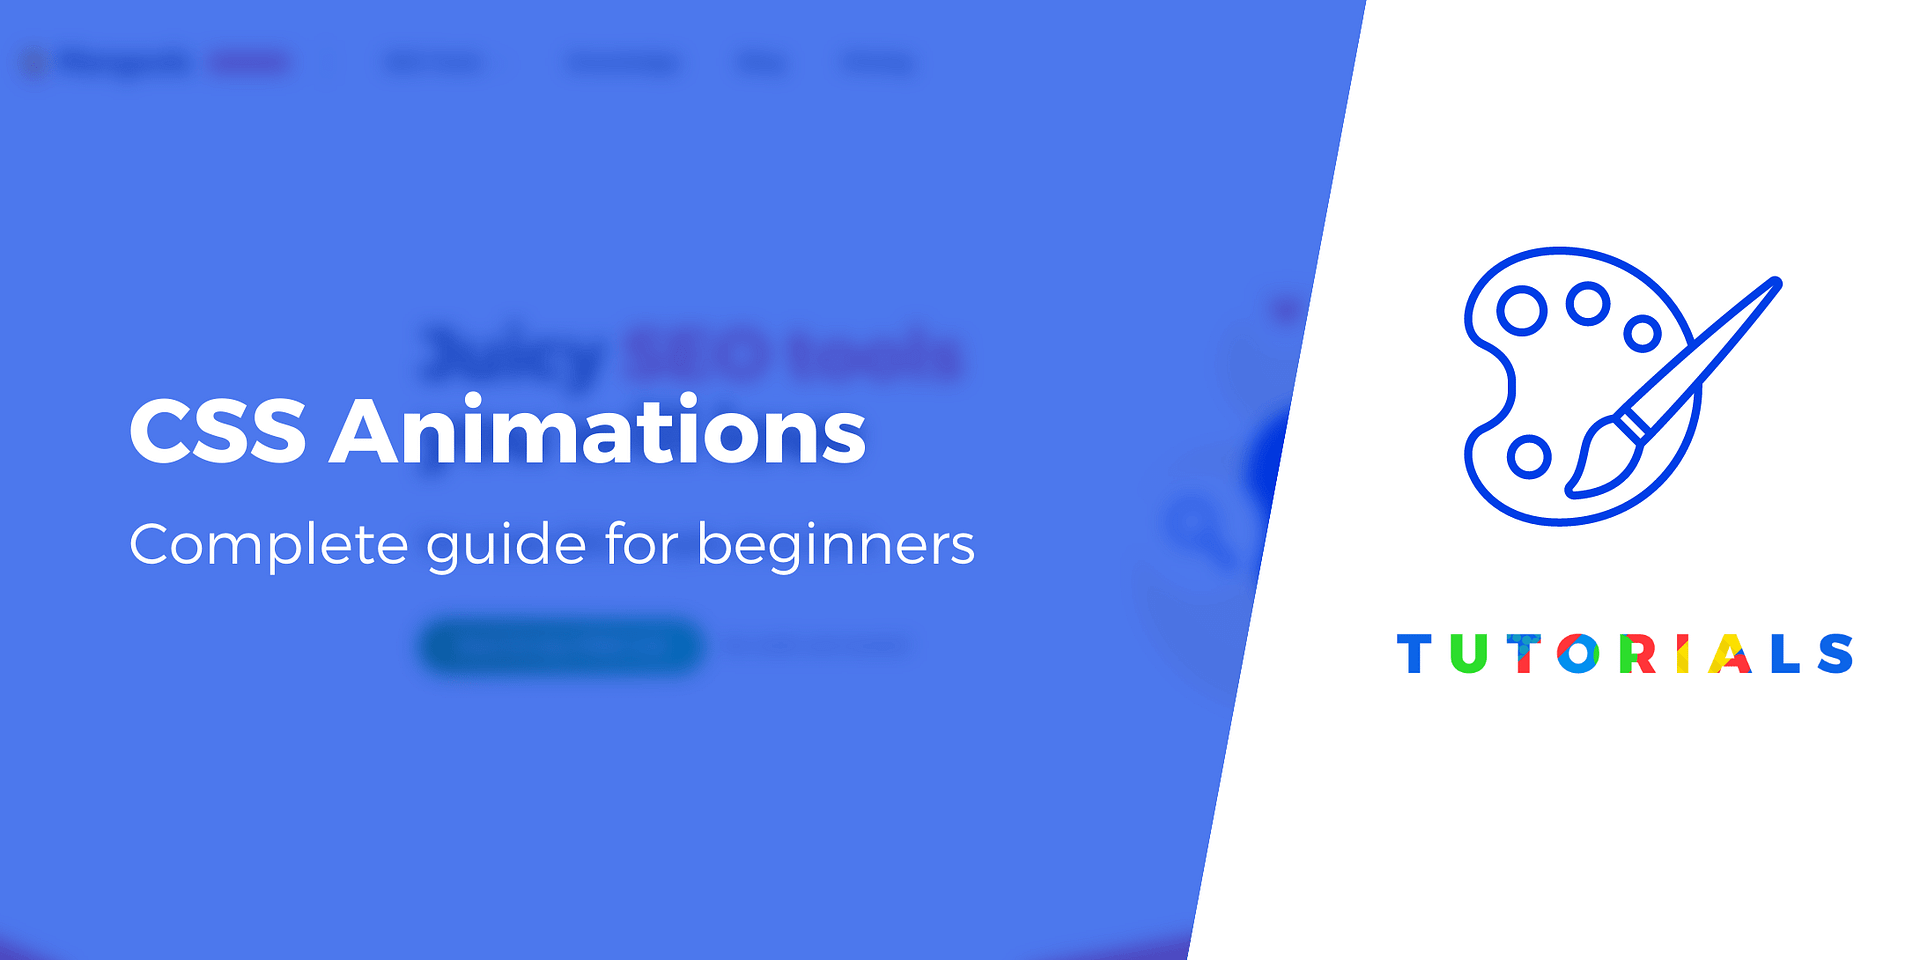 CSS Animations Tutorial: Complete Guide for Beginners